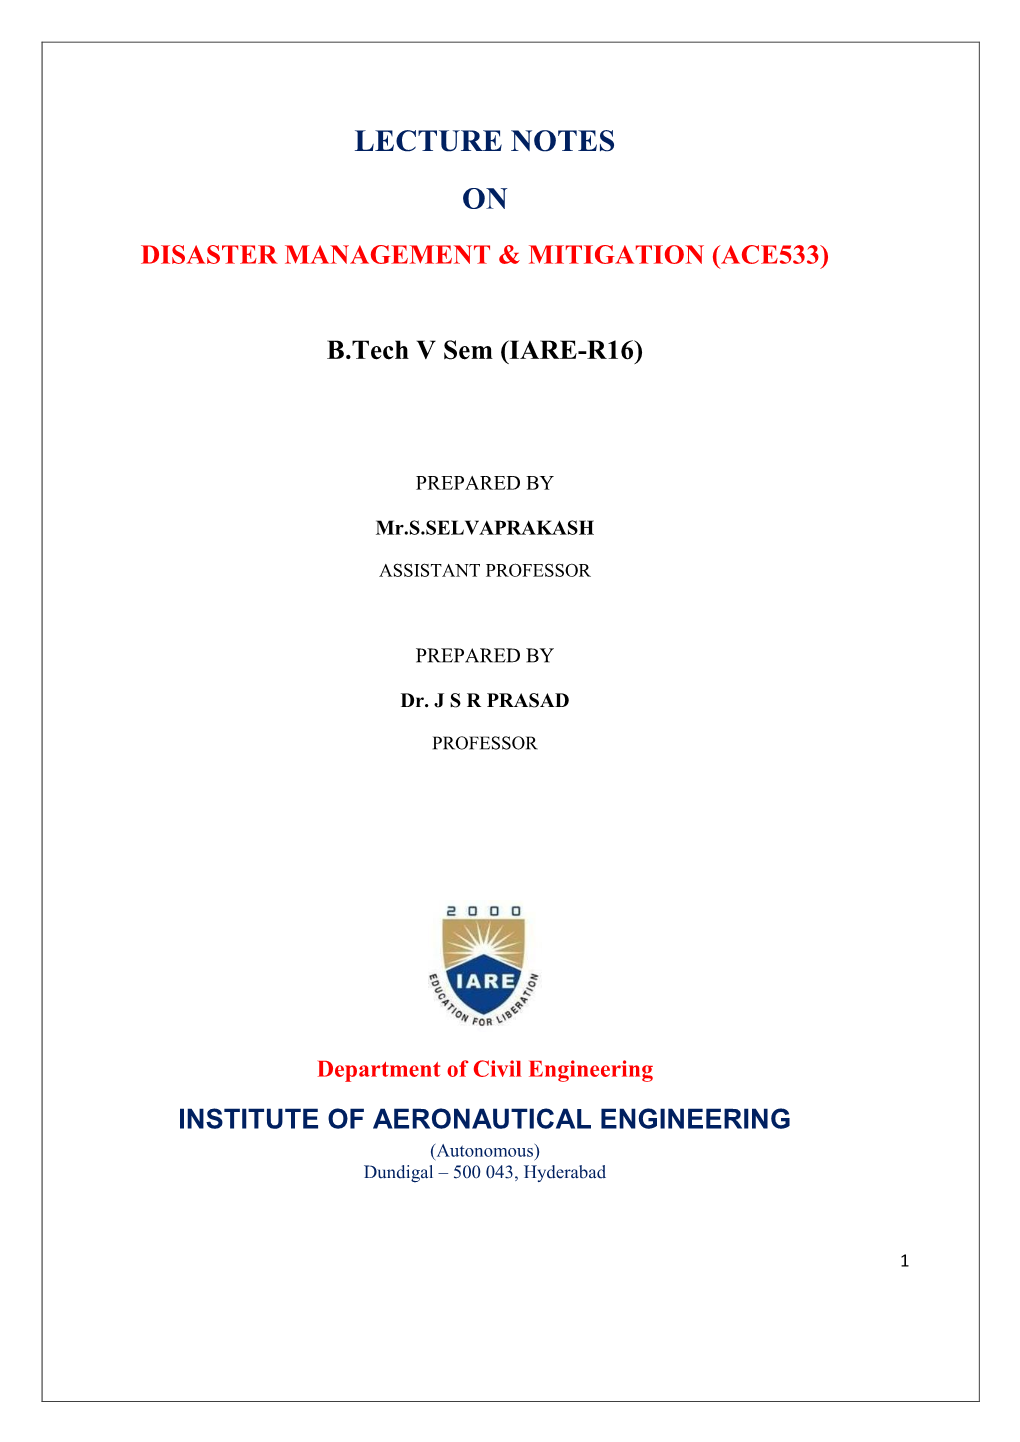 Lecture Notes on Disaster Management & Mitigation (Ace533)